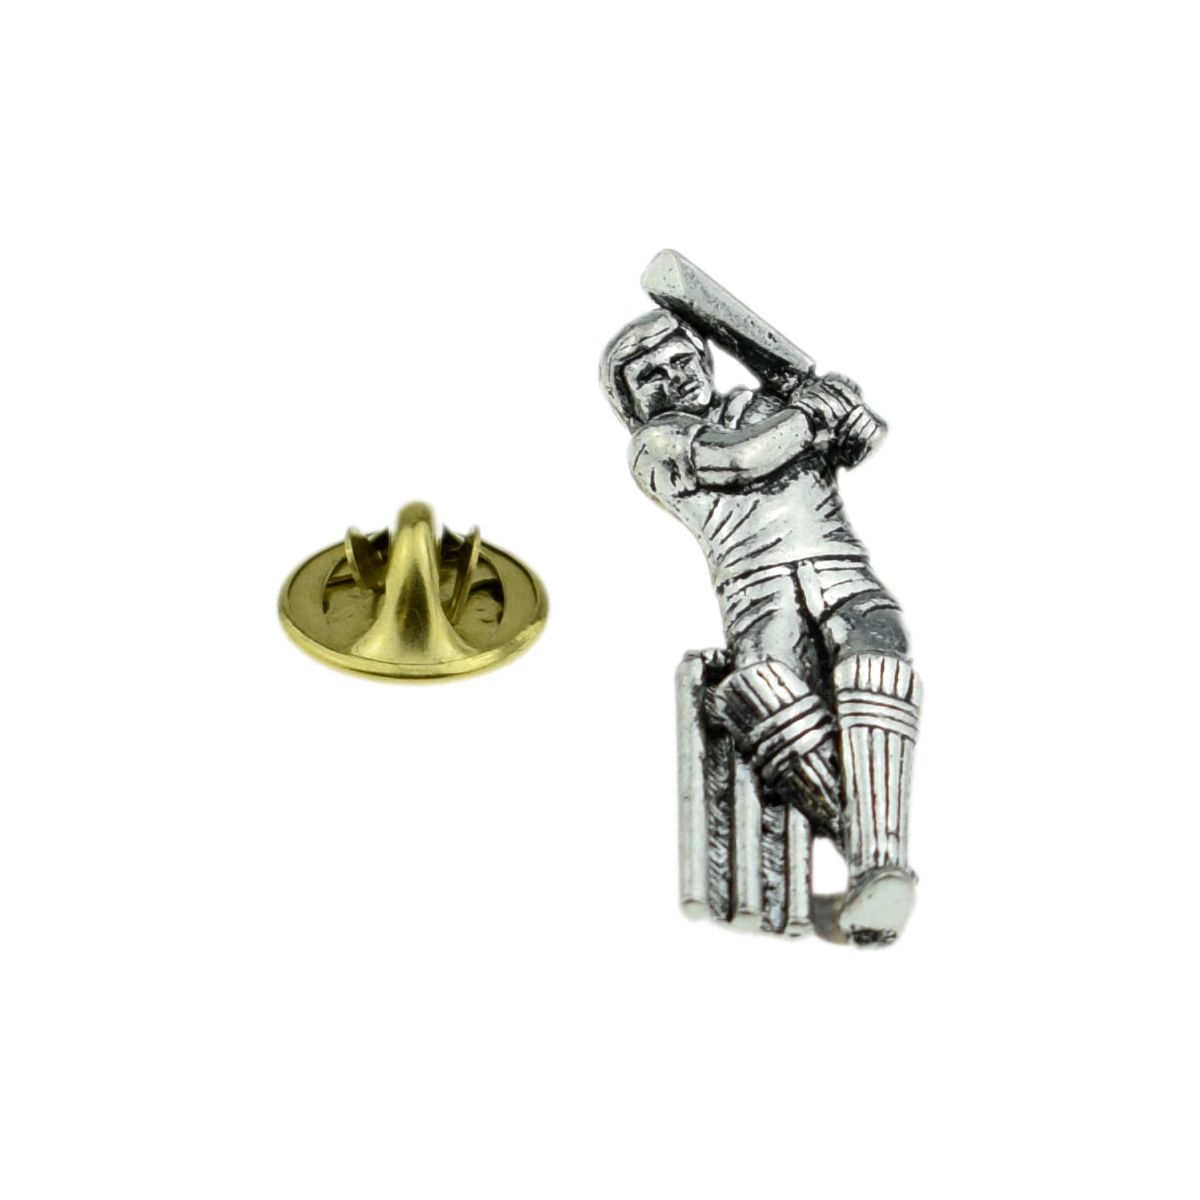 Cricketer Pewter Lapel Pin Badge - Ashton and Finch